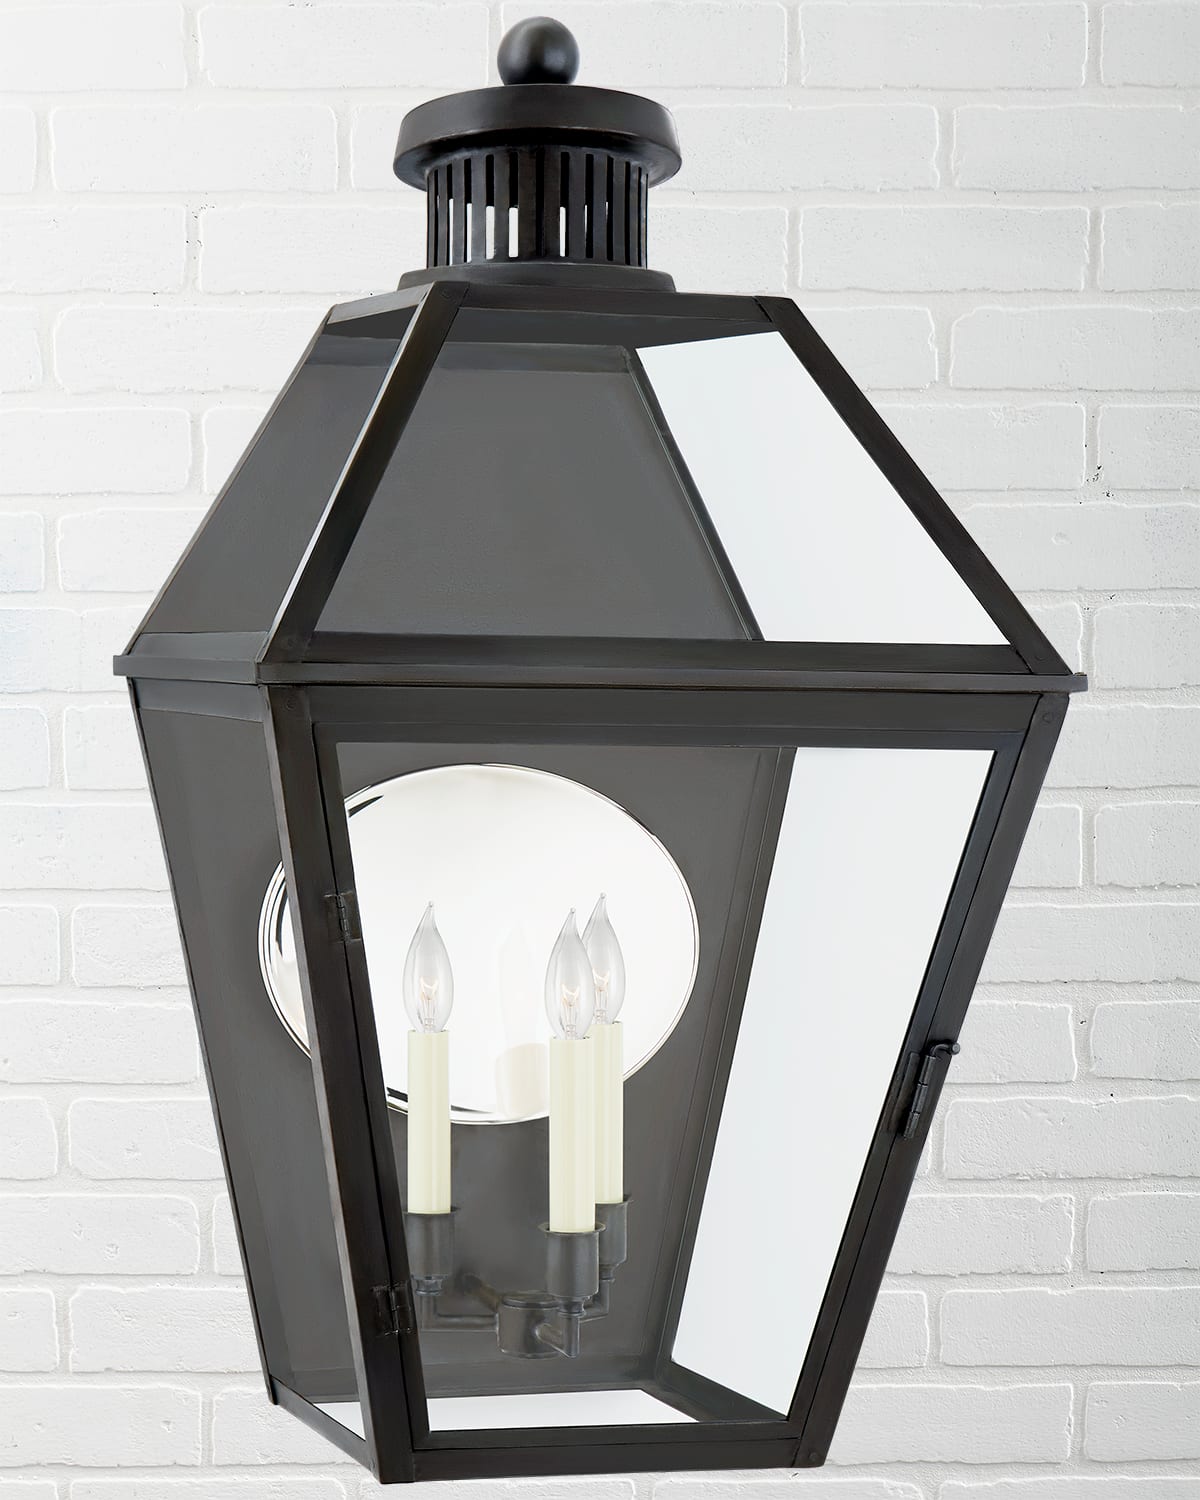 Chapman & Myers For Visual Comfort Signature Stratford Large 3/4 Wall Lantern By Chapman & Myers